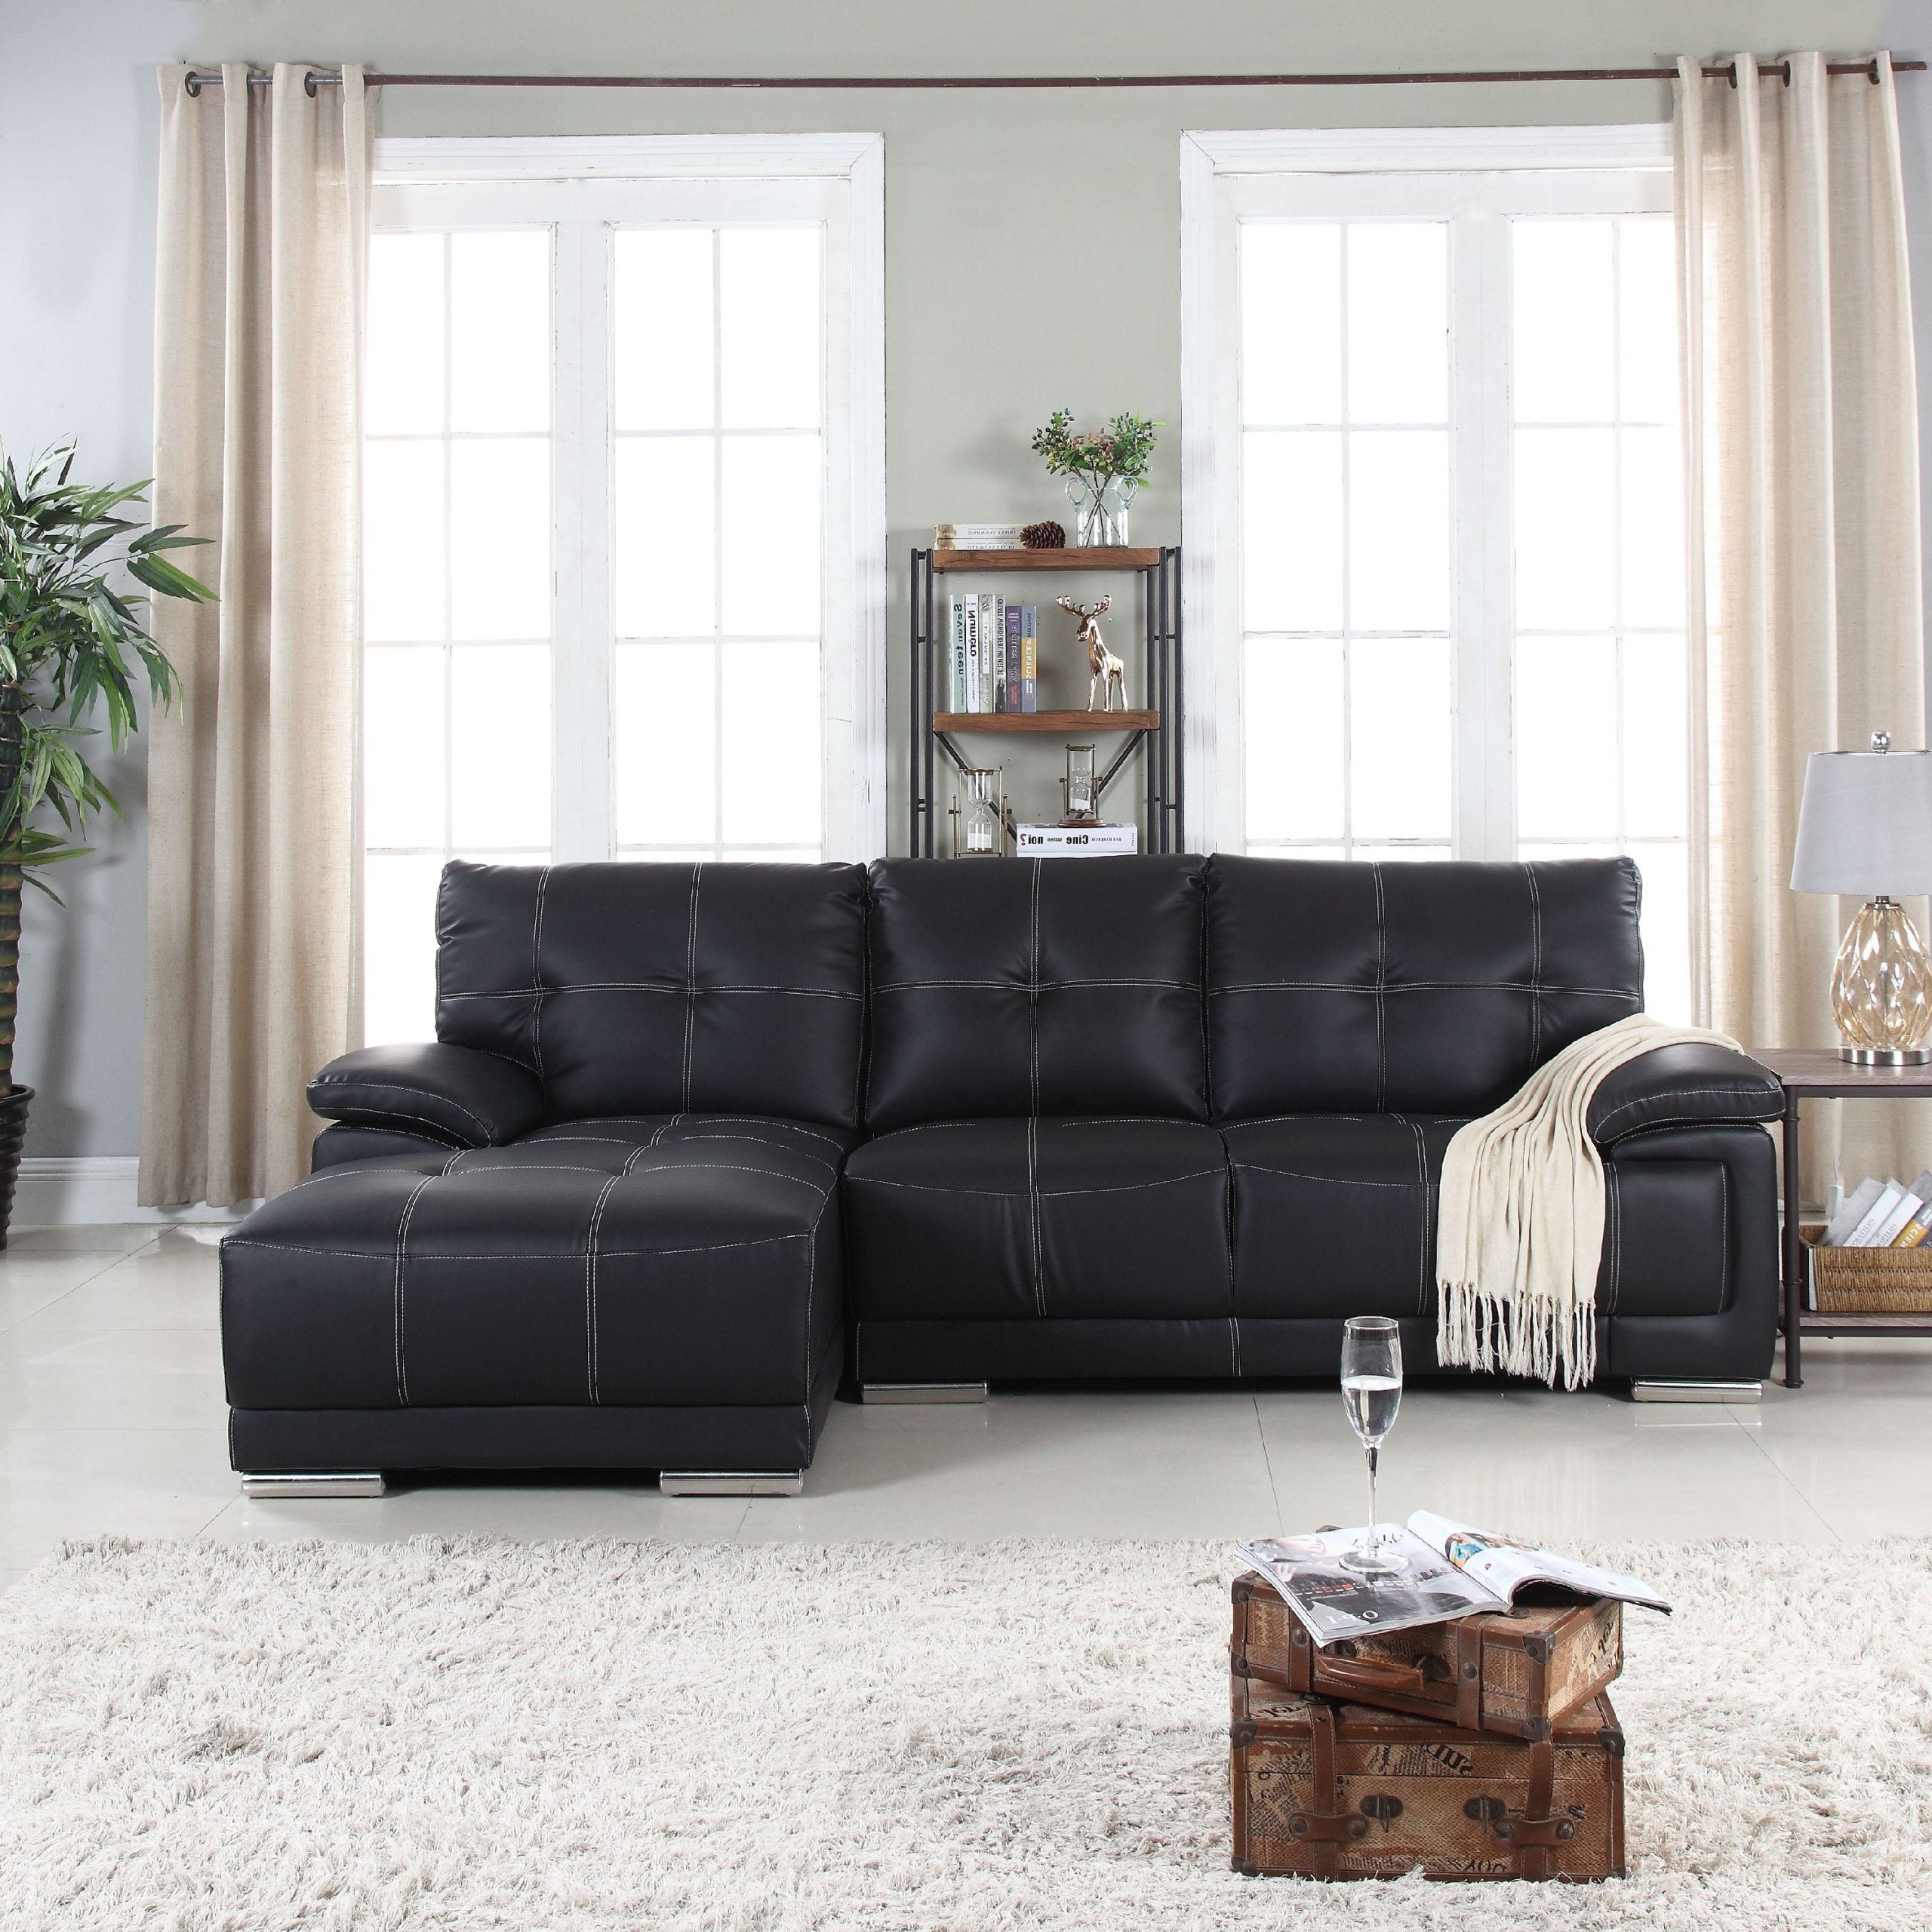 Preferred Classic Tufted Faux Leather Sectional Sofa – Walmart Intended For Faux Leather Sofas In Dark Brown (View 12 of 15)